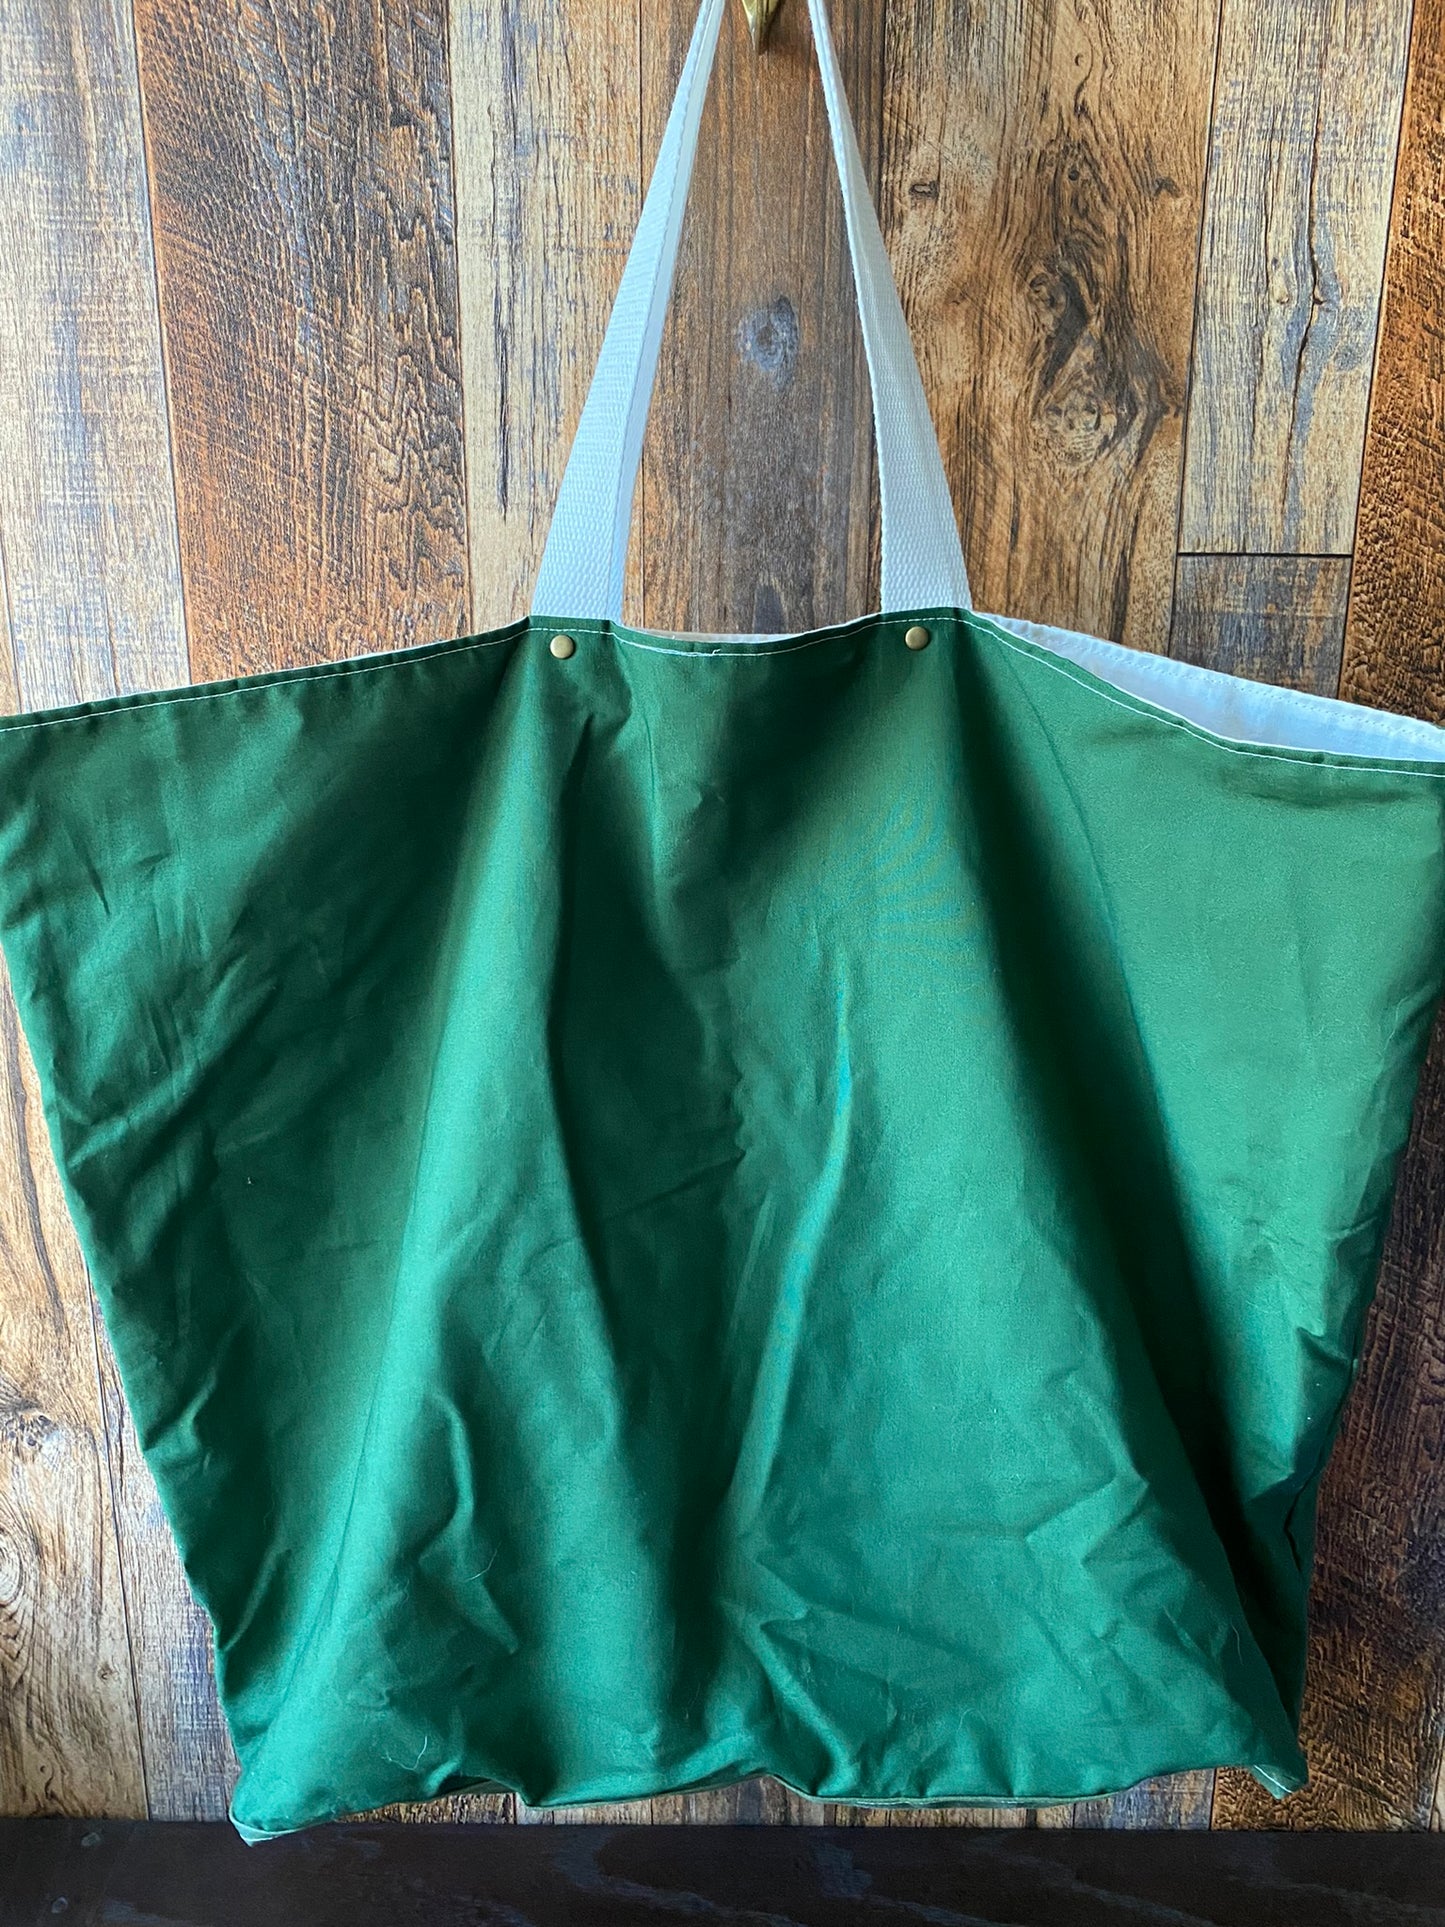 Extra Large and Lightweight Project or Festival Bag - Bryce Canyon